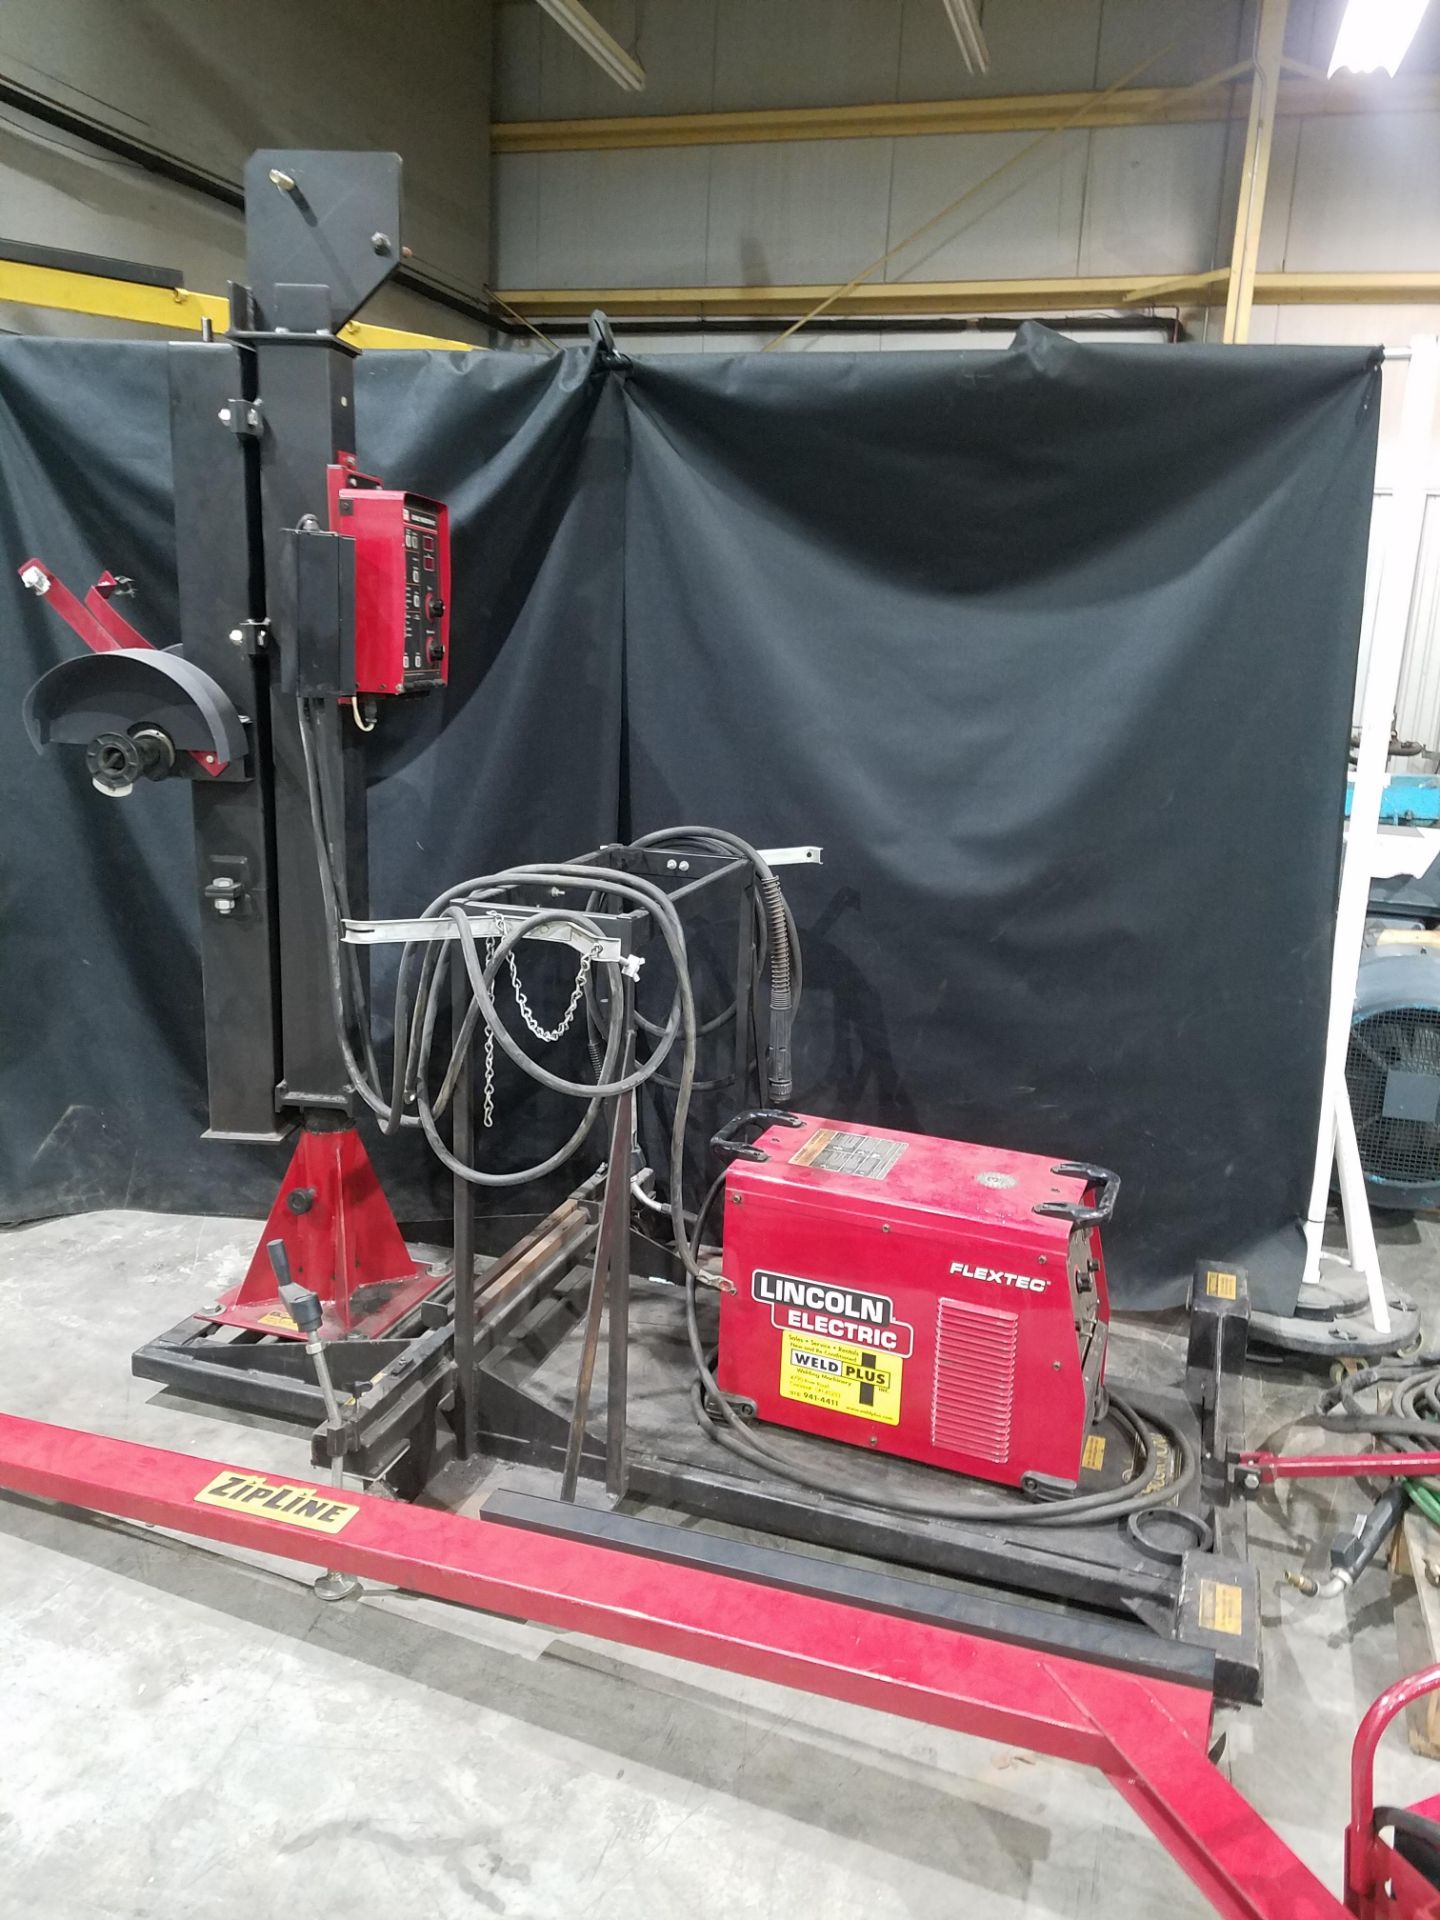 Lincoln Flextec 450 Muti-process ( Stick,DC,Tig,MIG ) Welder, s/n U1121010507, with Lincoln DH-10 - Image 2 of 6